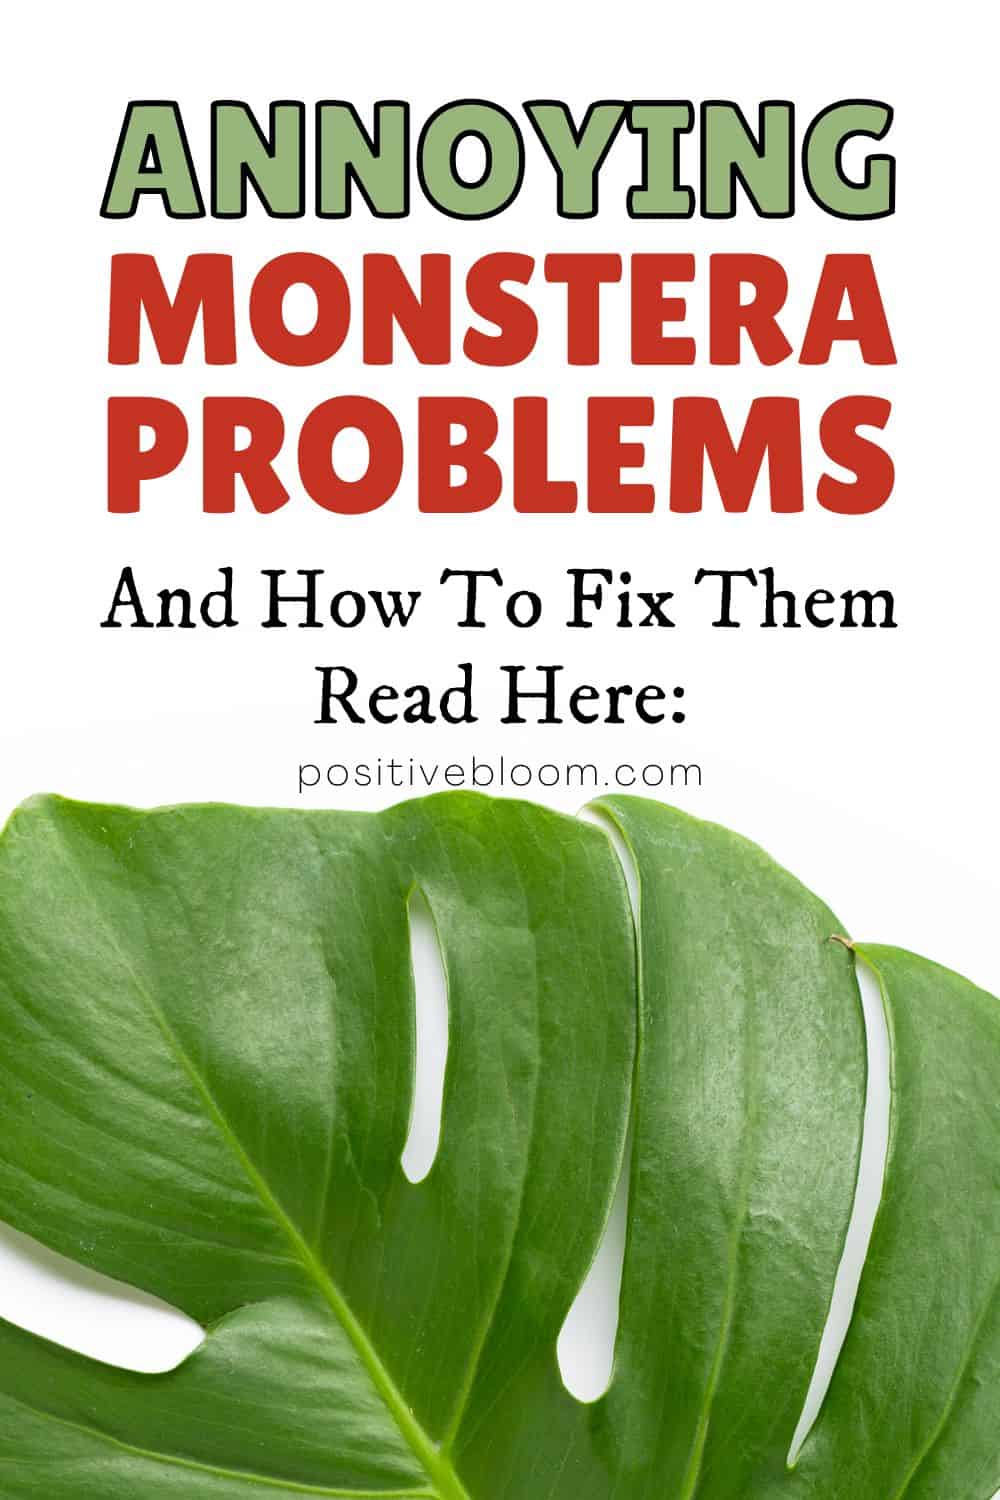 Annoying Monstera Problems And How To Fix Them Pinterest